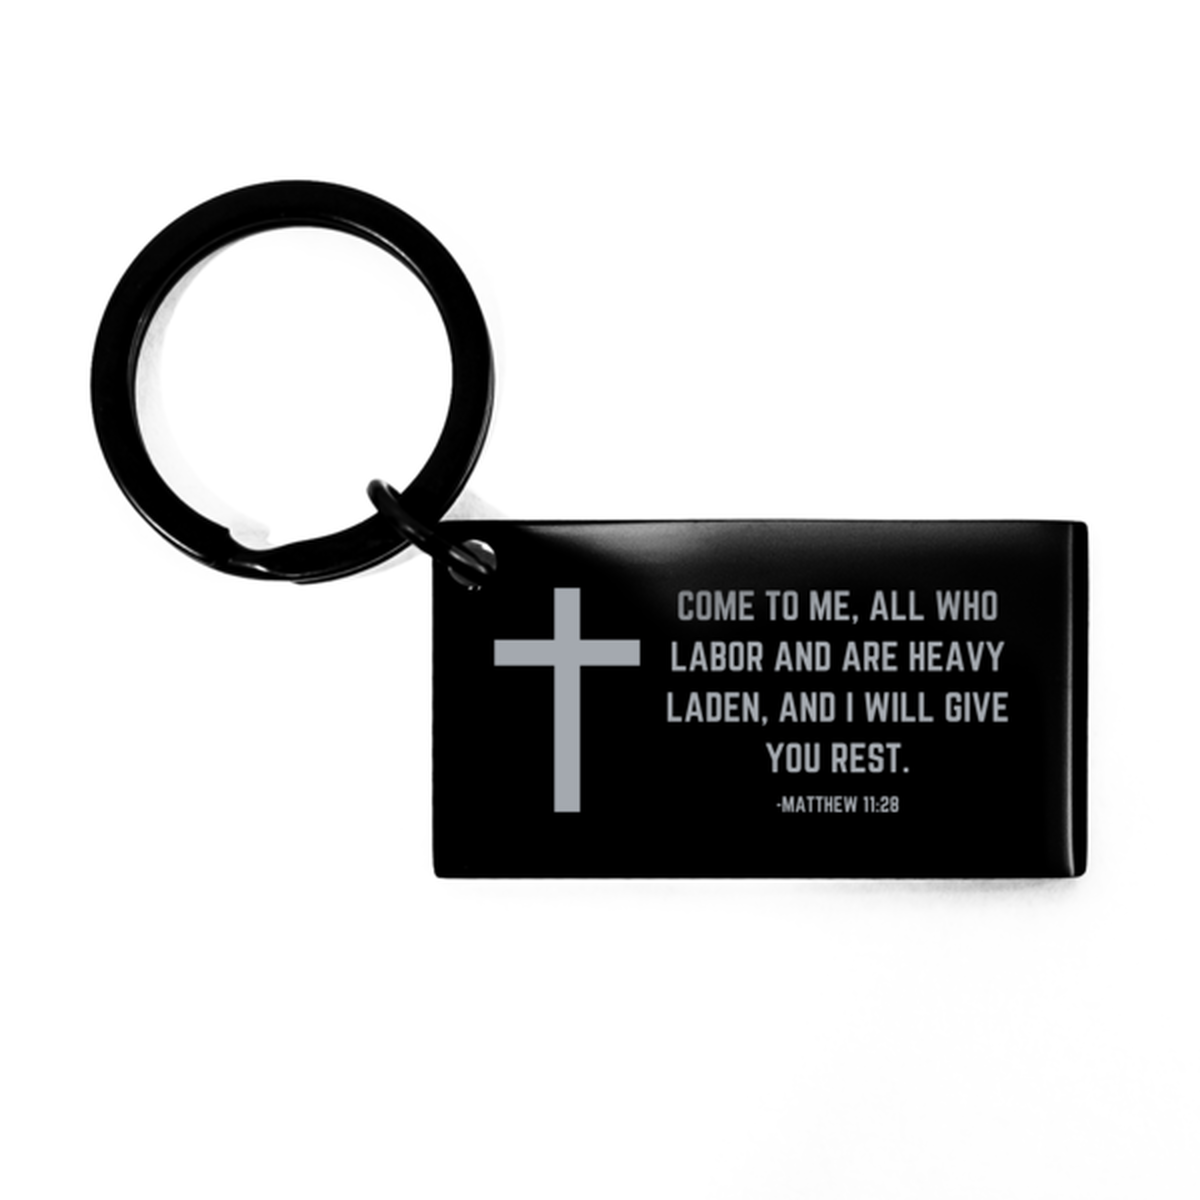 Baptism Gifts For Teenage Boys Girls, Christian Bible Verse Black Keychain, Come to me, all who labor, Confirmation Gifts, Bible Verse Keyring for Son, Godson, Grandson, Nephew